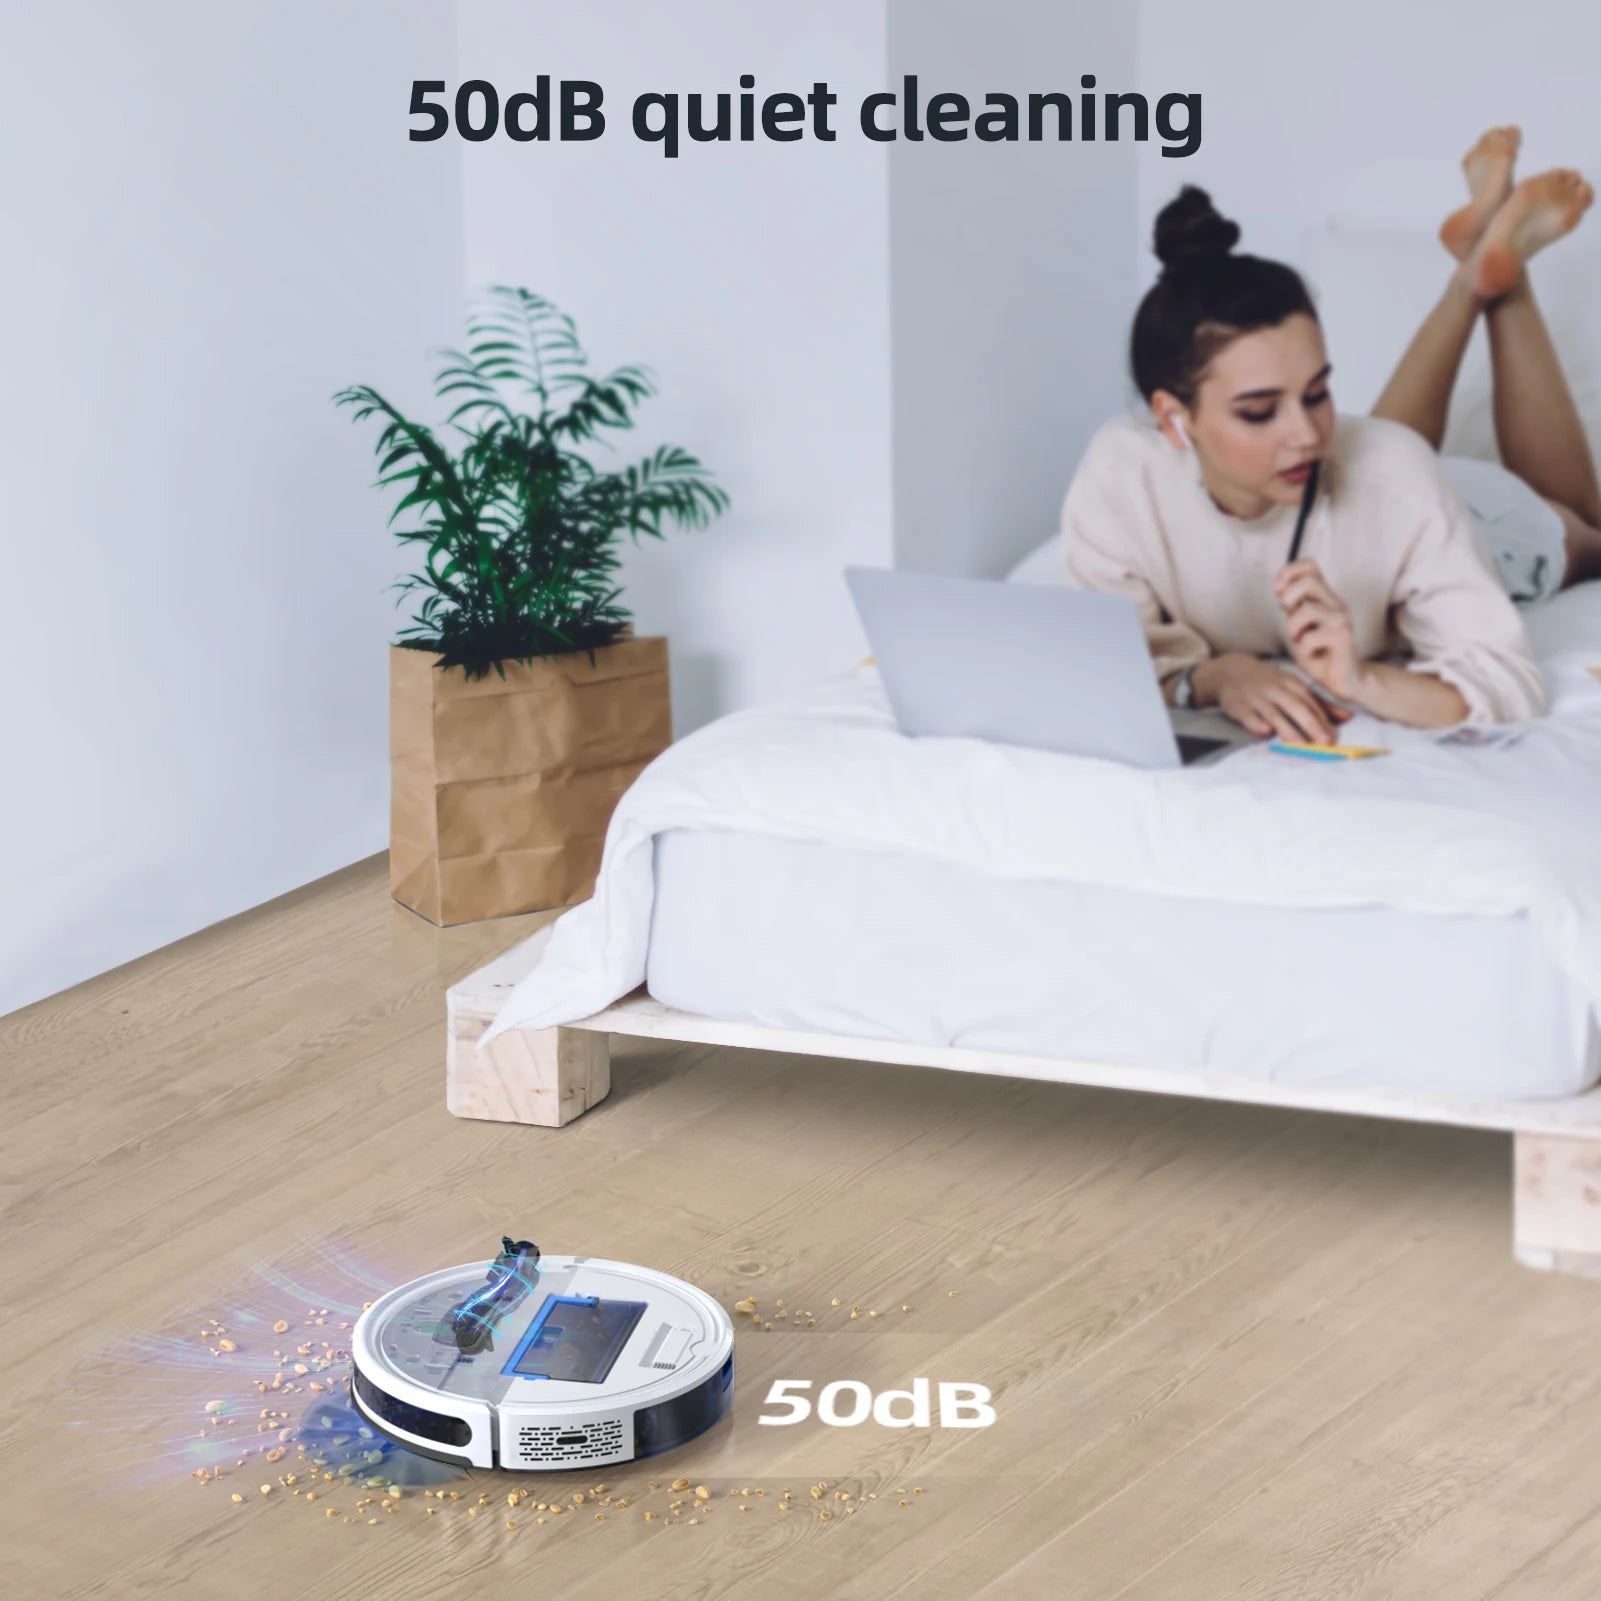 G20 Robot Vacuum Cleaner Sweep and Wet Mopping Floors&Carpet Run Auto Reharge Appliances Household Tool Dust Electric Sweeper